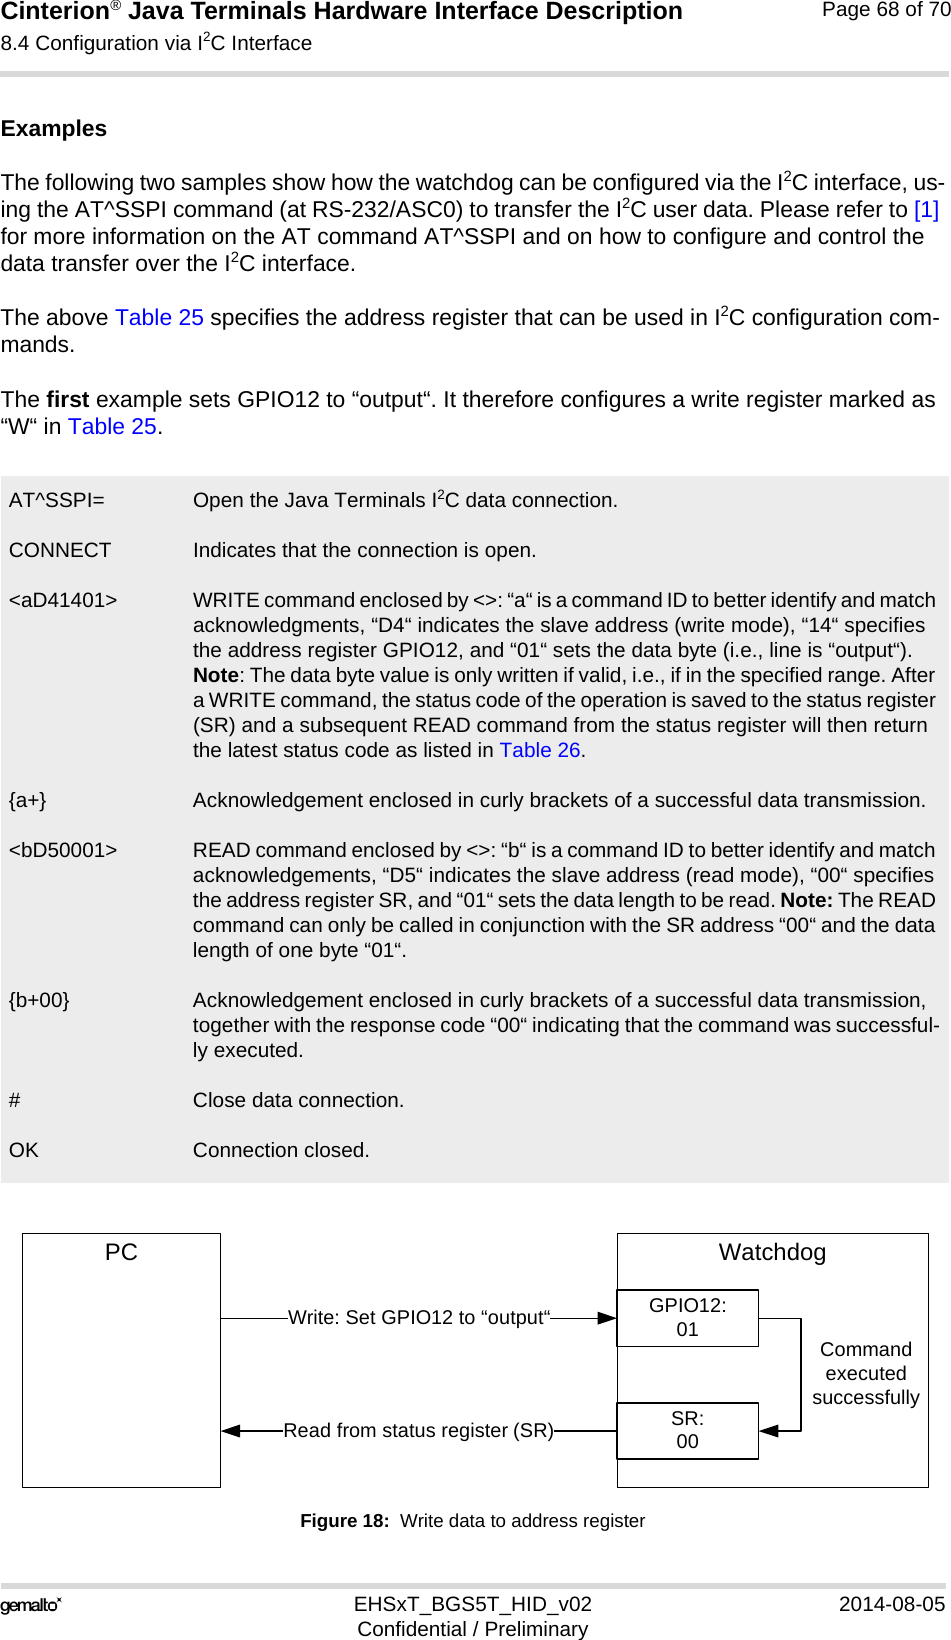 Cinterion® Java Terminals Hardware Interface Description8.4 Configuration via I2C Interface69EHSxT_BGS5T_HID_v02 2014-08-05Confidential / PreliminaryPage 68 of 70ExamplesThe following two samples show how the watchdog can be configured via the I2C interface, us-ing the AT^SSPI command (at RS-232/ASC0) to transfer the I2C user data. Please refer to [1] for more information on the AT command AT^SSPI and on how to configure and control the data transfer over the I2C interface. The above Table 25 specifies the address register that can be used in I2C configuration com-mands.The first example sets GPIO12 to “output“. It therefore configures a write register marked as “W“ in Table 25. Figure 18:  Write data to address registerAT^SSPI=CONNECT&lt;aD41401&gt;{a+}&lt;bD50001&gt;{b+00}#OKOpen the Java Terminals I2C data connection. Indicates that the connection is open.WRITE command enclosed by &lt;&gt;: “a“ is a command ID to better identify and match acknowledgments, “D4“ indicates the slave address (write mode), “14“ specifies the address register GPIO12, and “01“ sets the data byte (i.e., line is “output“). Note: The data byte value is only written if valid, i.e., if in the specified range. After a WRITE command, the status code of the operation is saved to the status register (SR) and a subsequent READ command from the status register will then return the latest status code as listed in Table 26.Acknowledgement enclosed in curly brackets of a successful data transmission.READ command enclosed by &lt;&gt;: “b“ is a command ID to better identify and match acknowledgements, “D5“ indicates the slave address (read mode), “00“ specifies the address register SR, and “01“ sets the data length to be read. Note: The READ command can only be called in conjunction with the SR address “00“ and the data length of one byte “01“.Acknowledgement enclosed in curly brackets of a successful data transmission, together with the response code “00“ indicating that the command was successful-ly executed.Close data connection.Connection closed.PC WatchdogWrite: Set GPIO12 to “output“ GPIO12:01SR:00Read from status register (SR)Command executed successfully